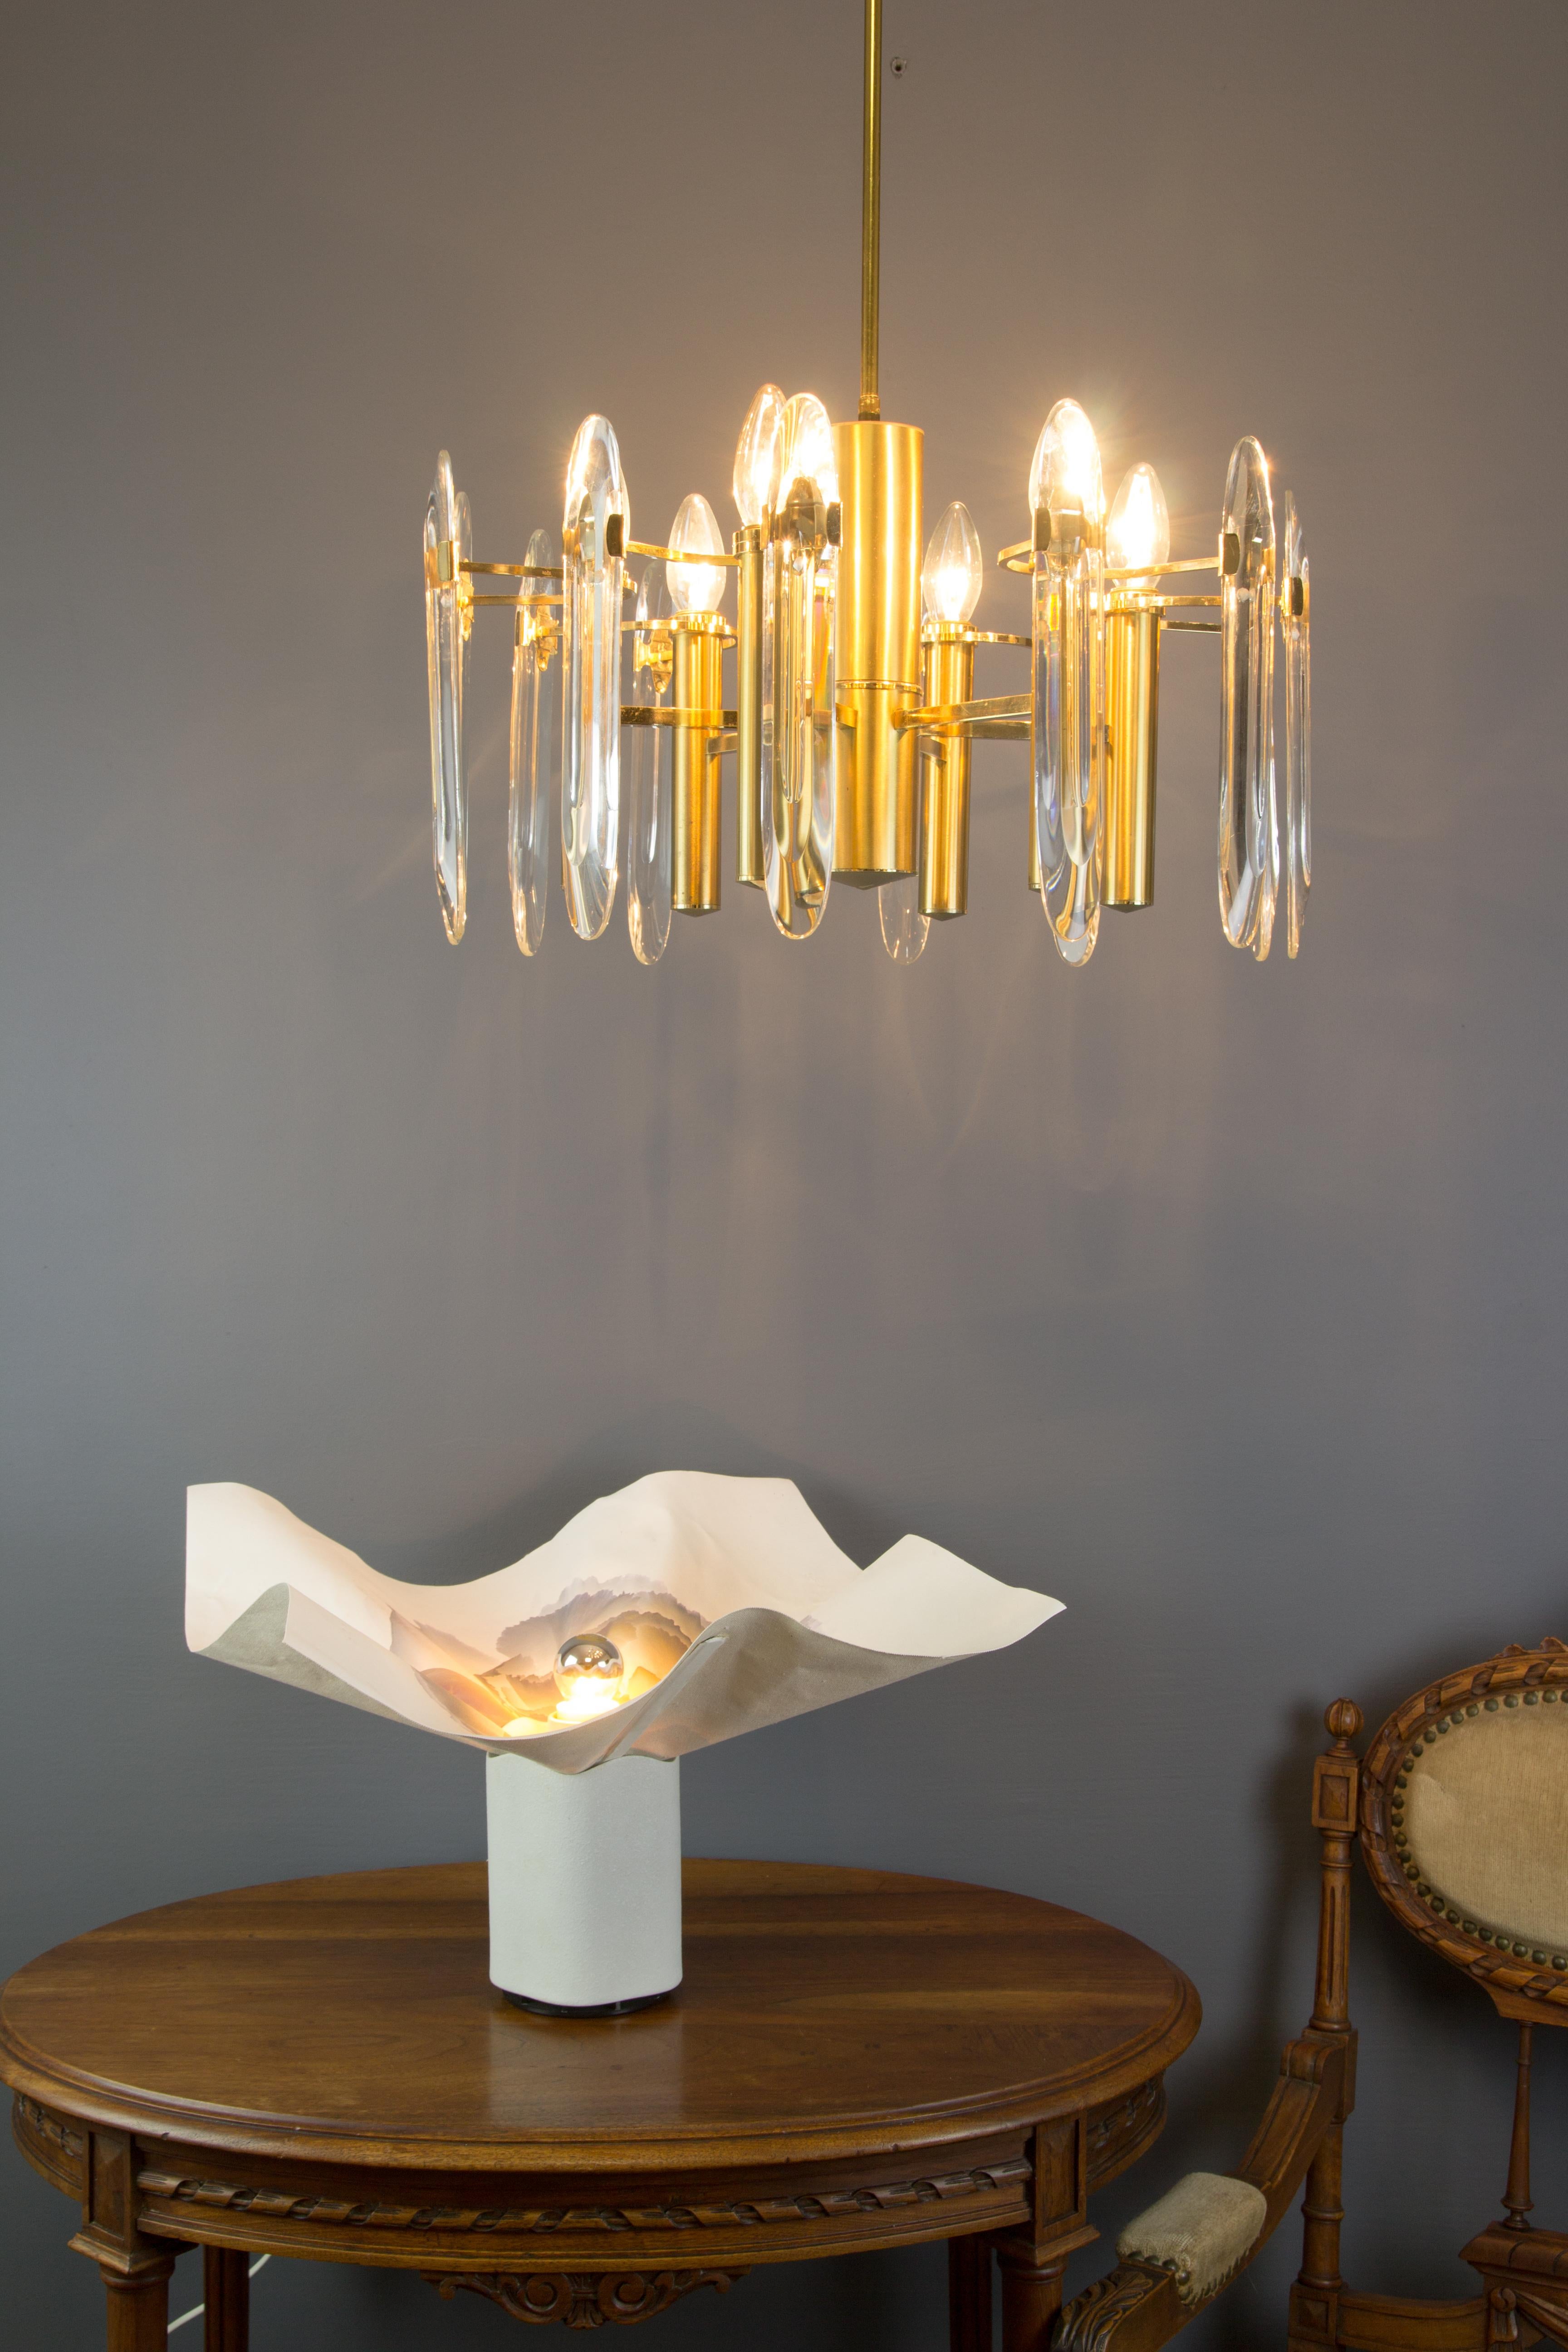 This beautiful chandelier was designed by Oscar Torlasco for Stilkronen in the 1960s, in Italy. The chandelier consists of six arms that correspond to 6-light points which hold 2 glasses/ lenses each for a total of 12 glasses. Golden brass